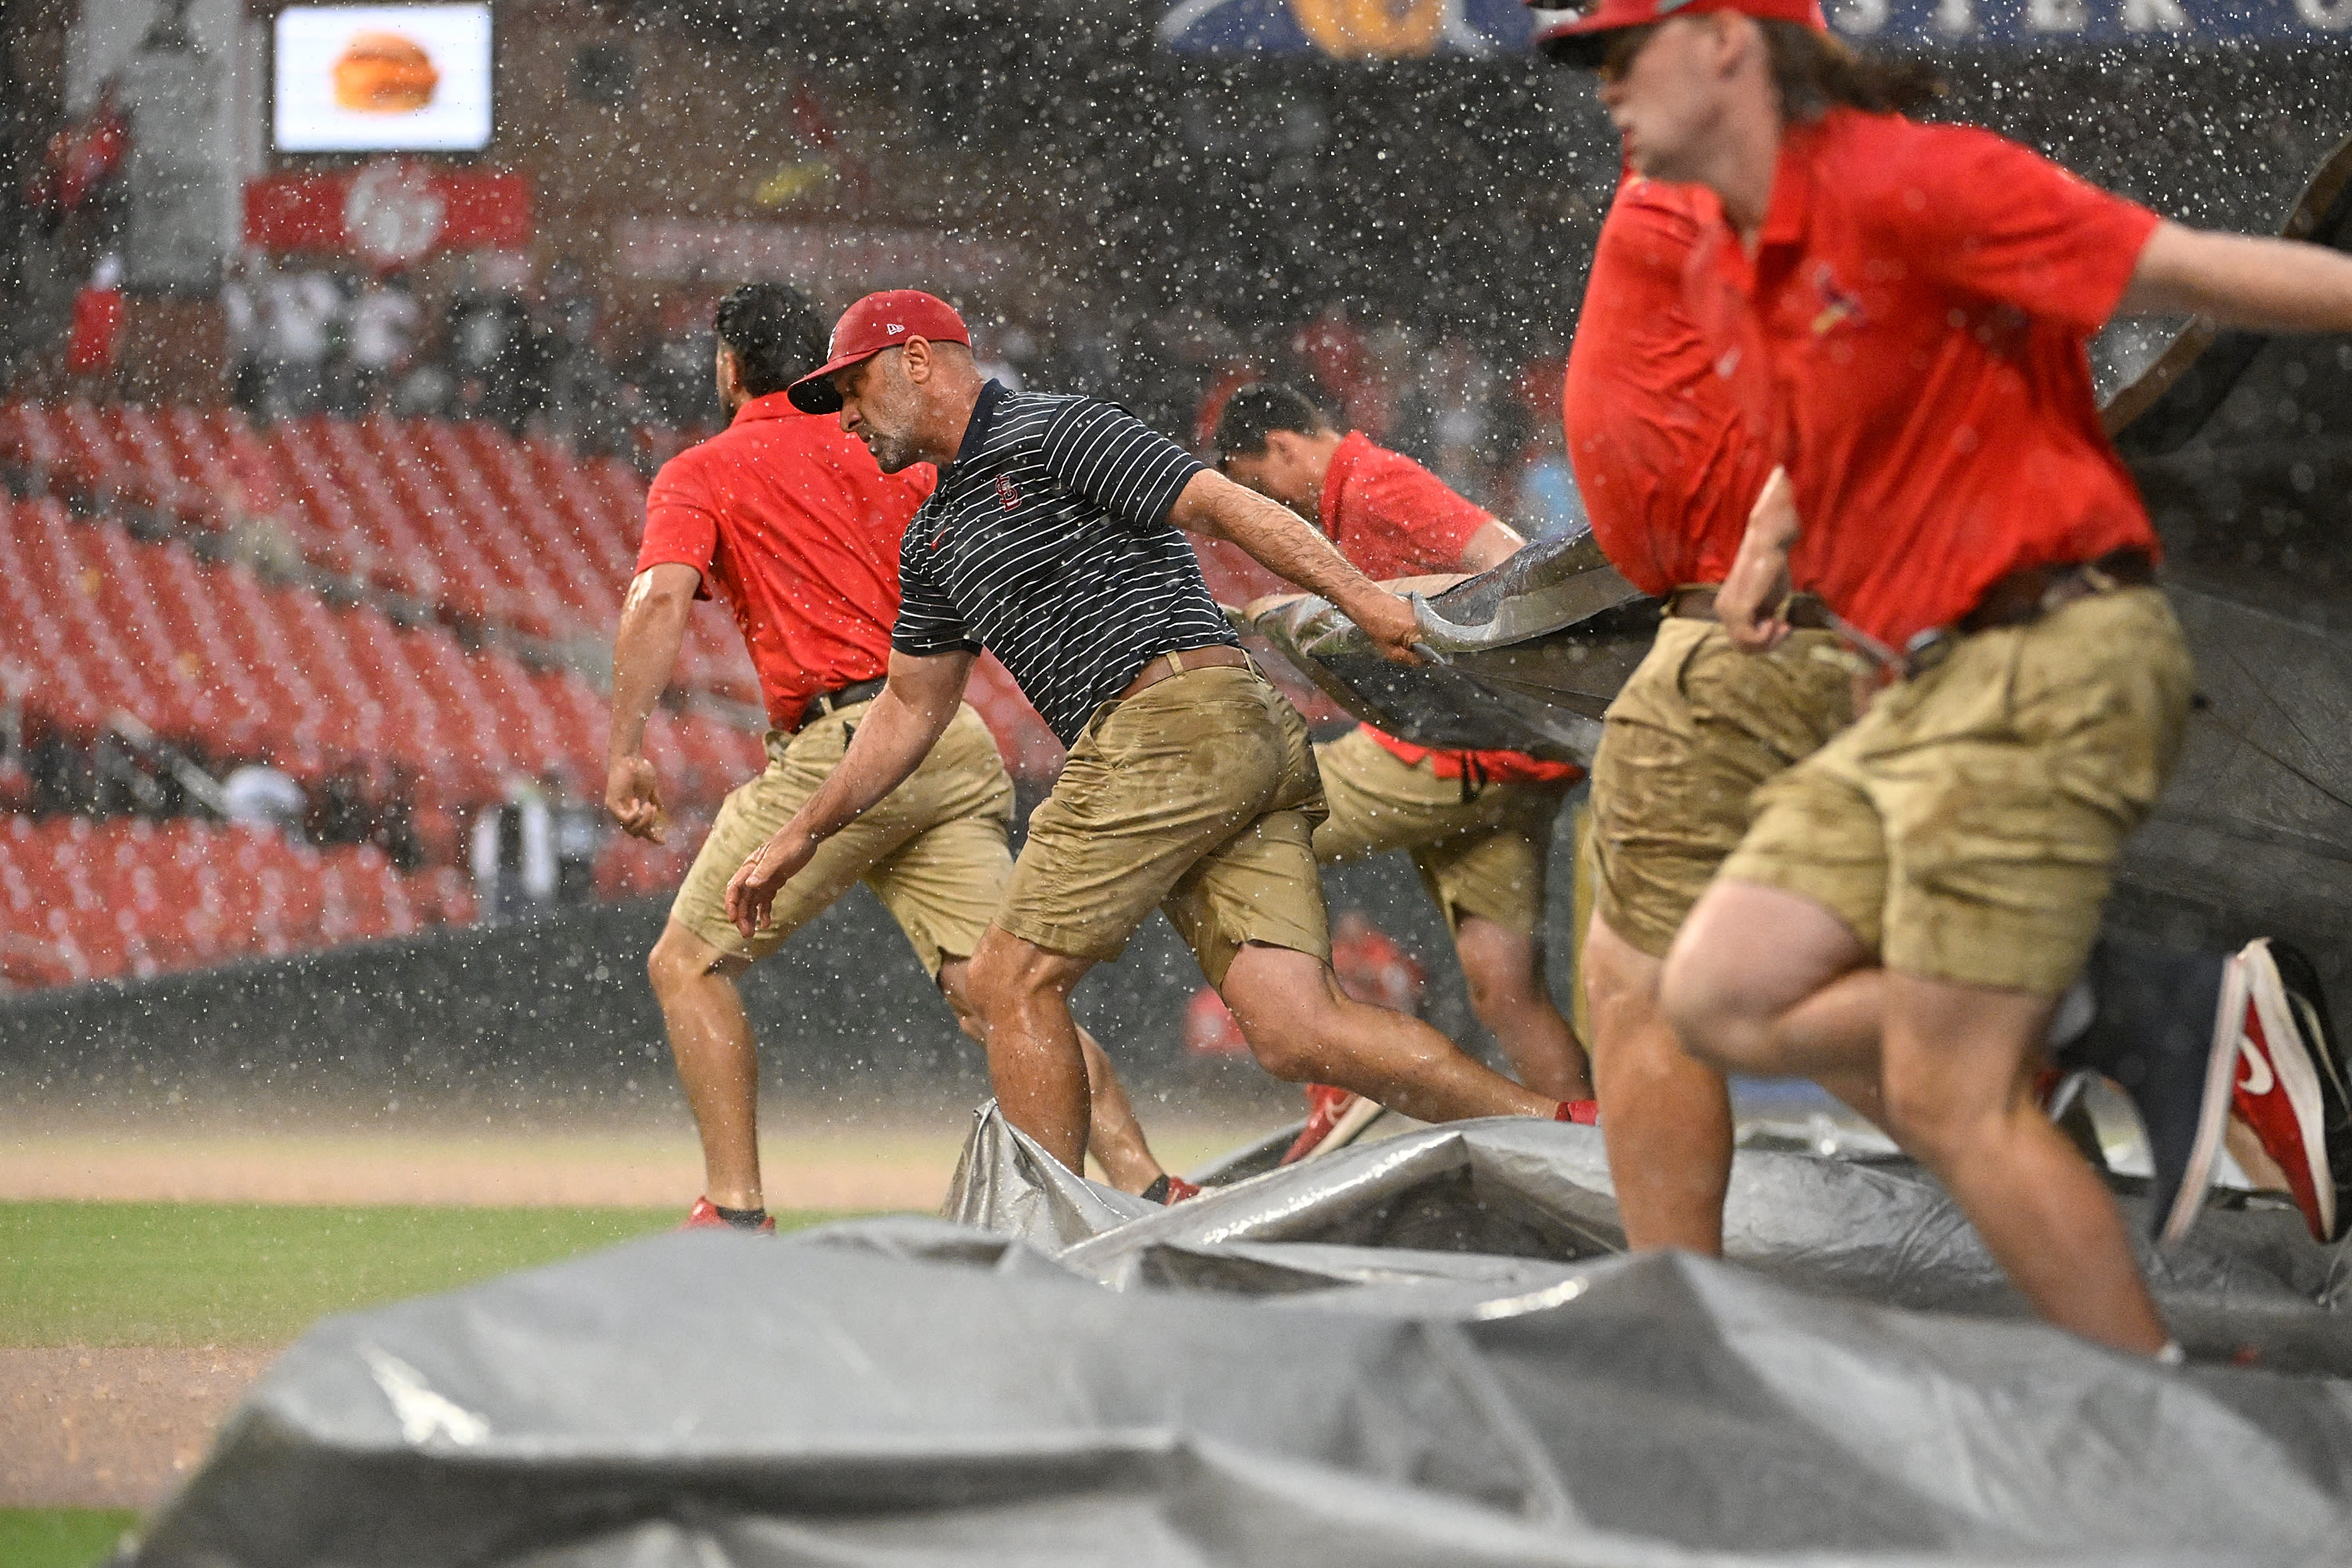 Friday's Cubs-Cardinals game to start in rain delay. Here's estimated first pitch